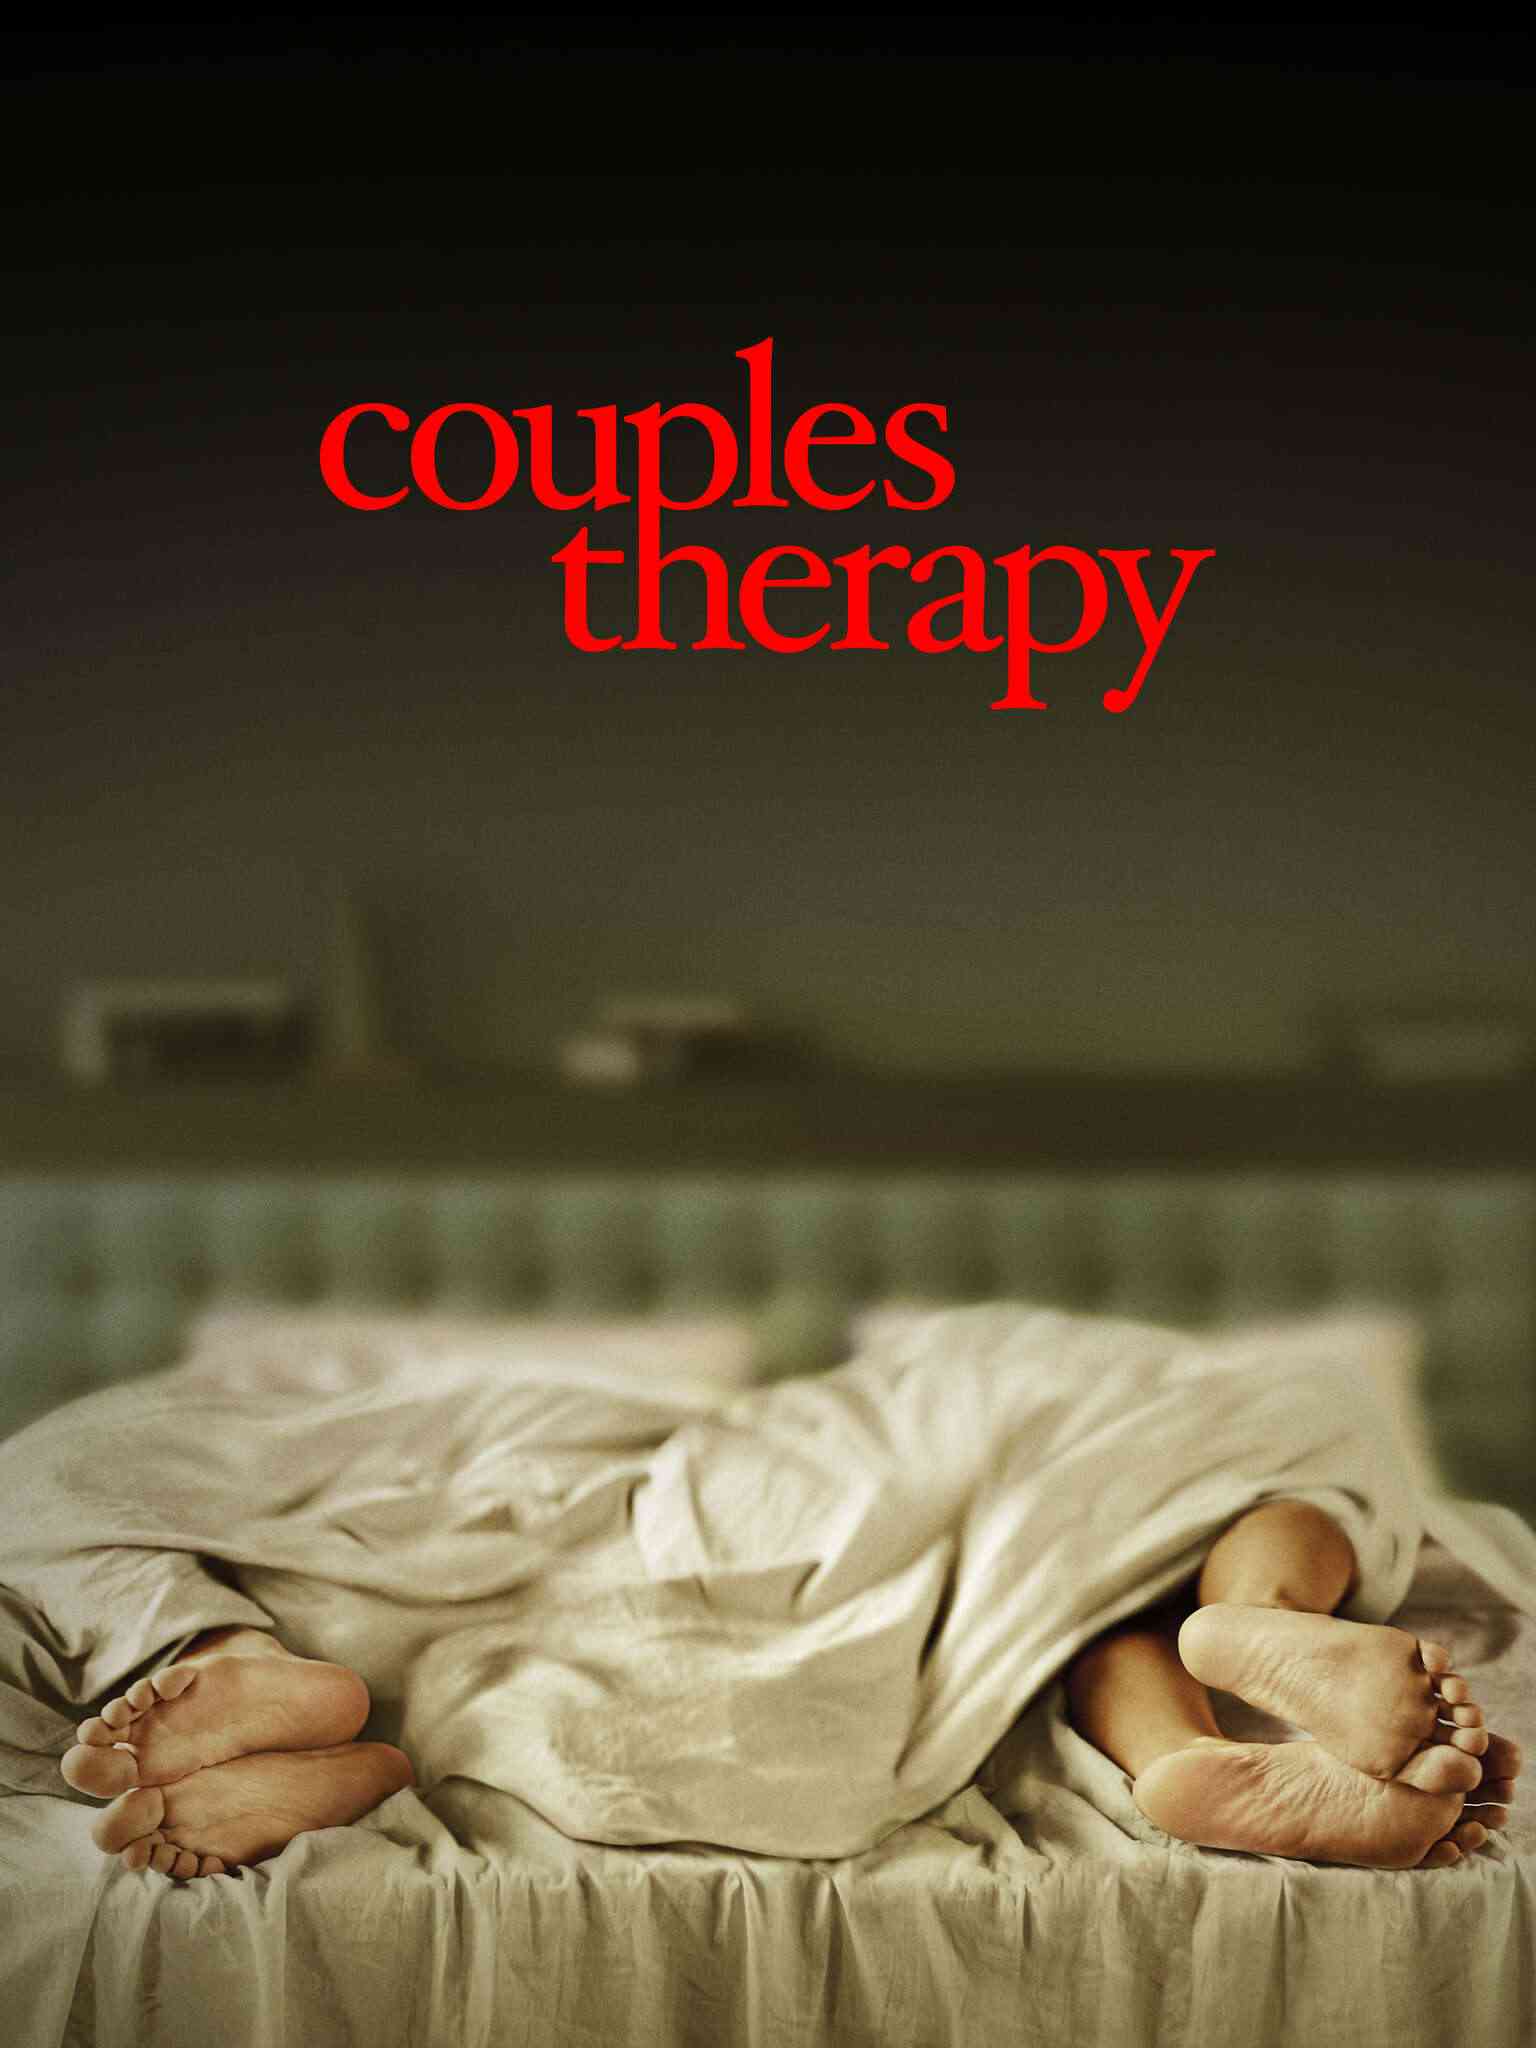 Couples therapy_11zon